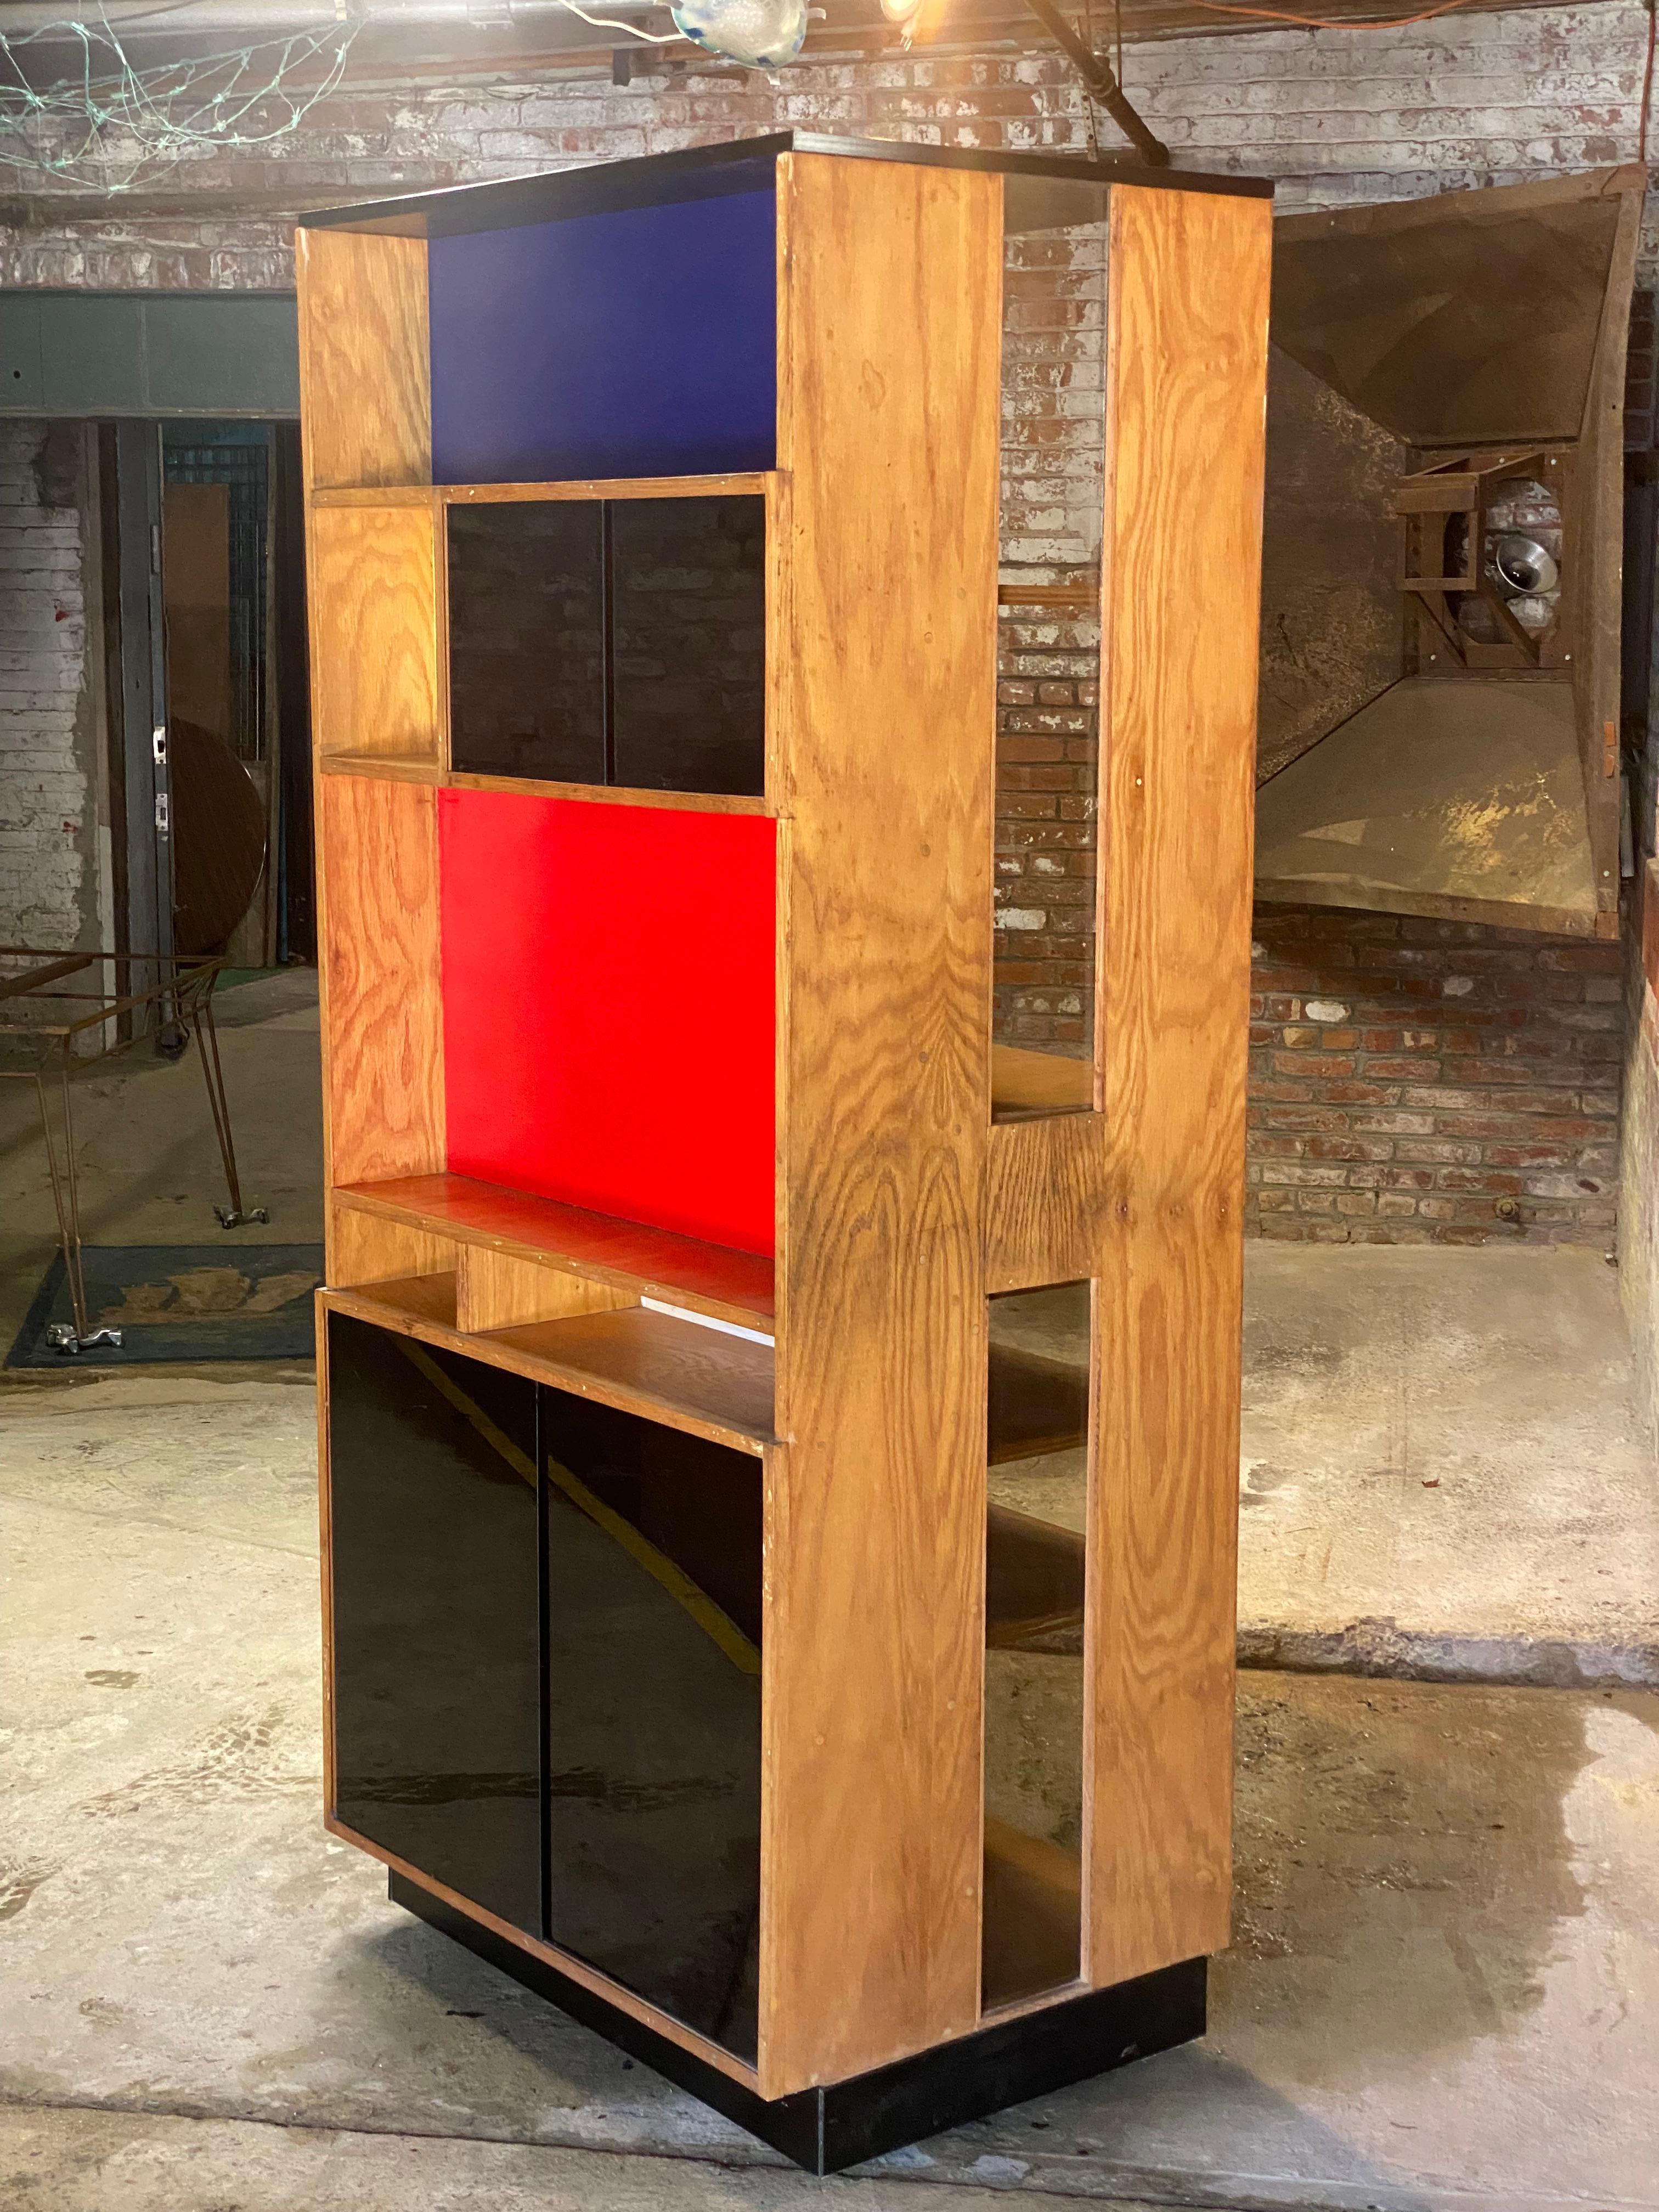 This wonderfully constructed utility cabinet was the creation of the Upstate New York artist, Leonard Buzz Wallace (1932-2021). Wallace was an accomplished artist and teacher throughout the 1950s-1990s working out of his home, which he built with